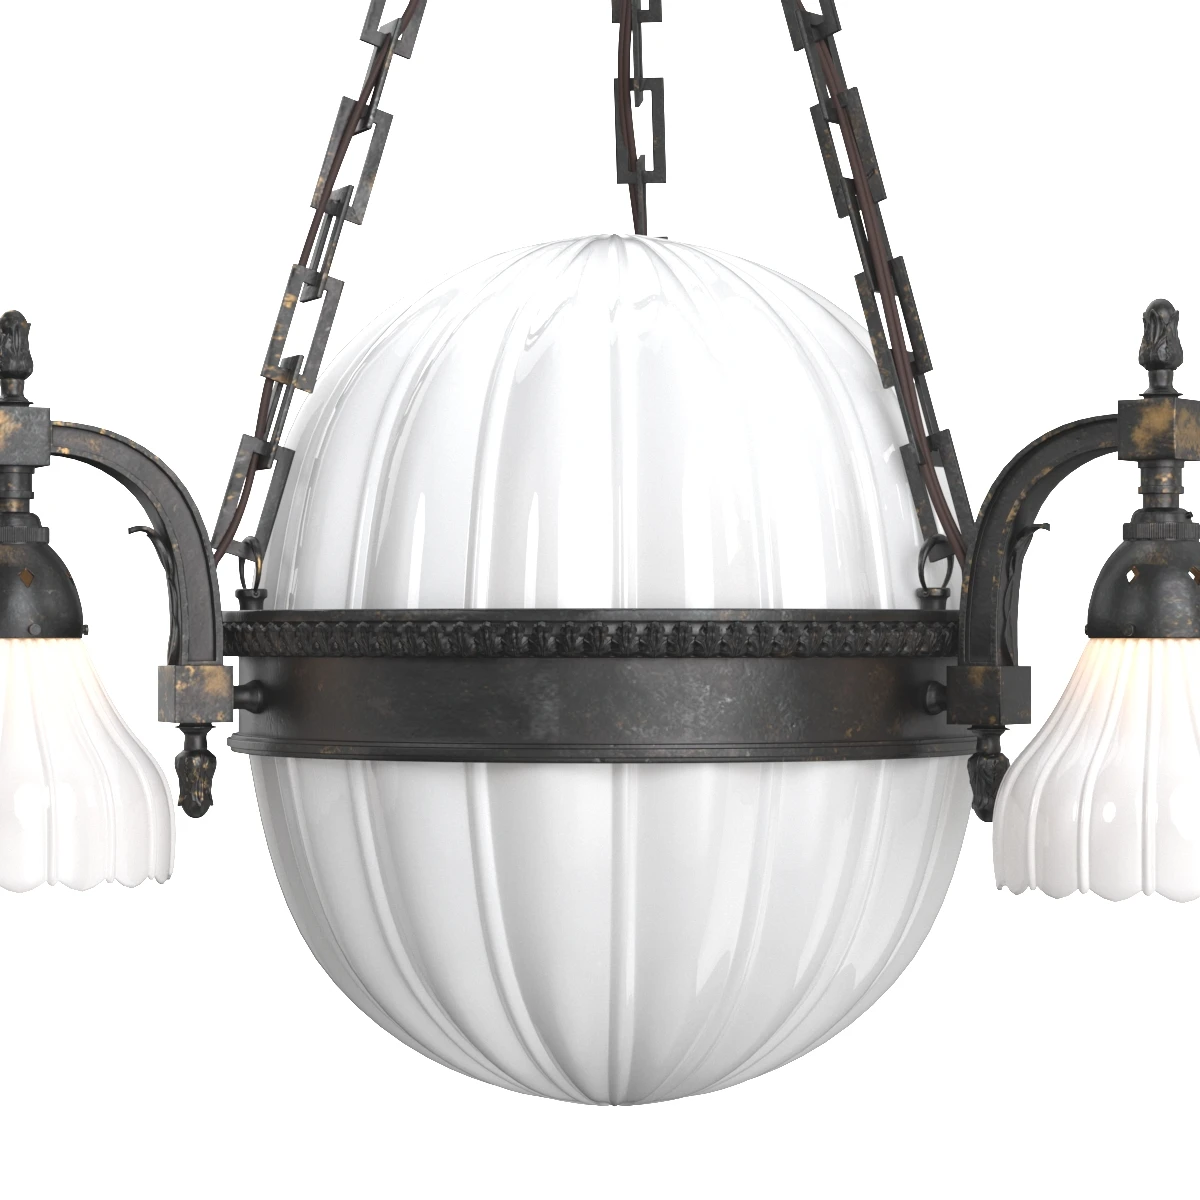 Moonstone Chandelier by Jefferson and Co England Circa 1910 3D Model_06